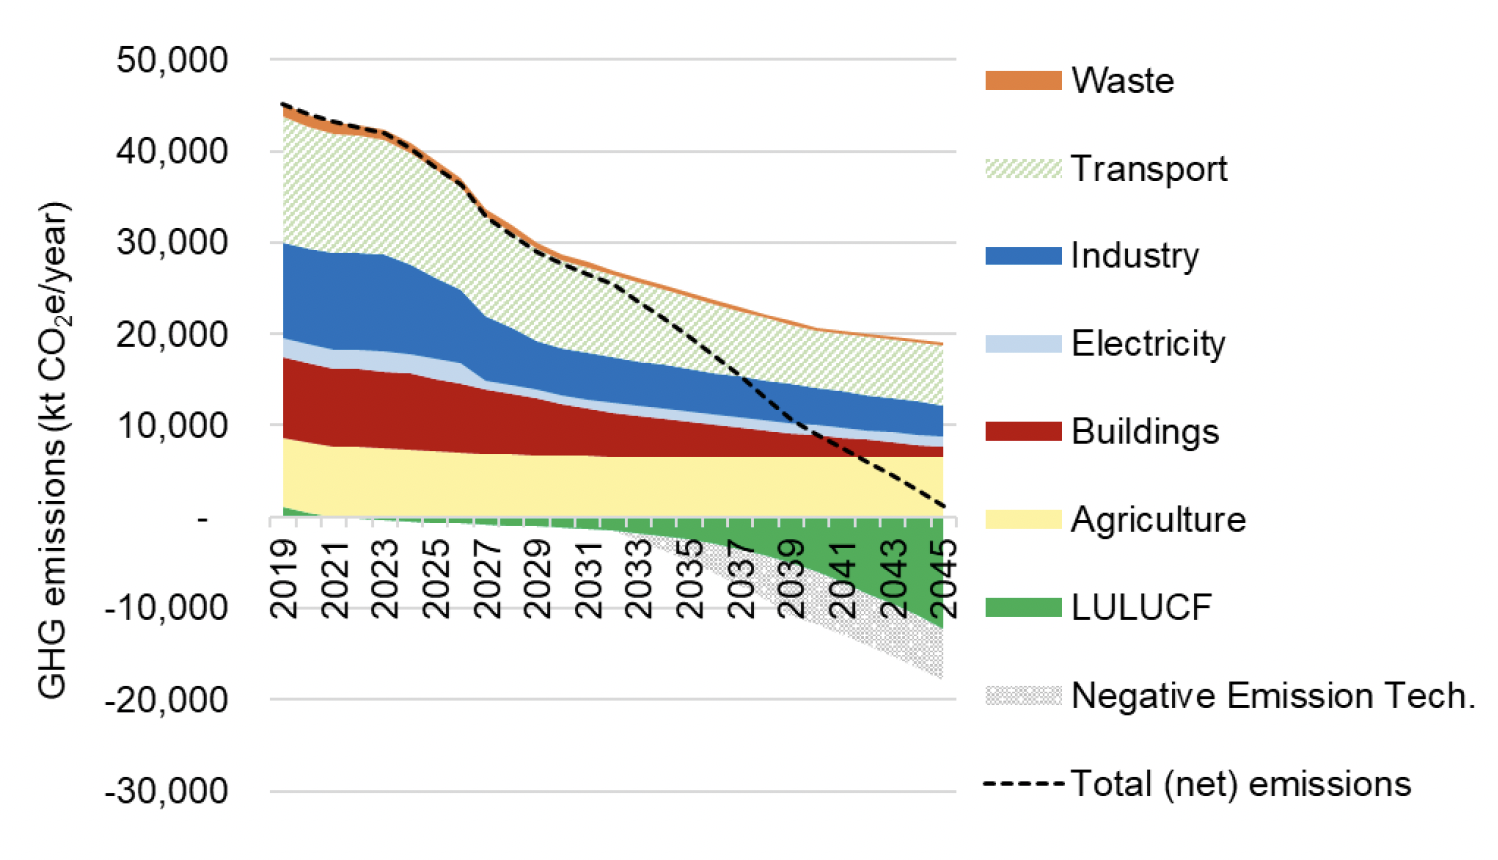 An area and line chart showing emissions by sector and total net emissions estimated by Phase 2. 
The results are described in subsequent tables and text